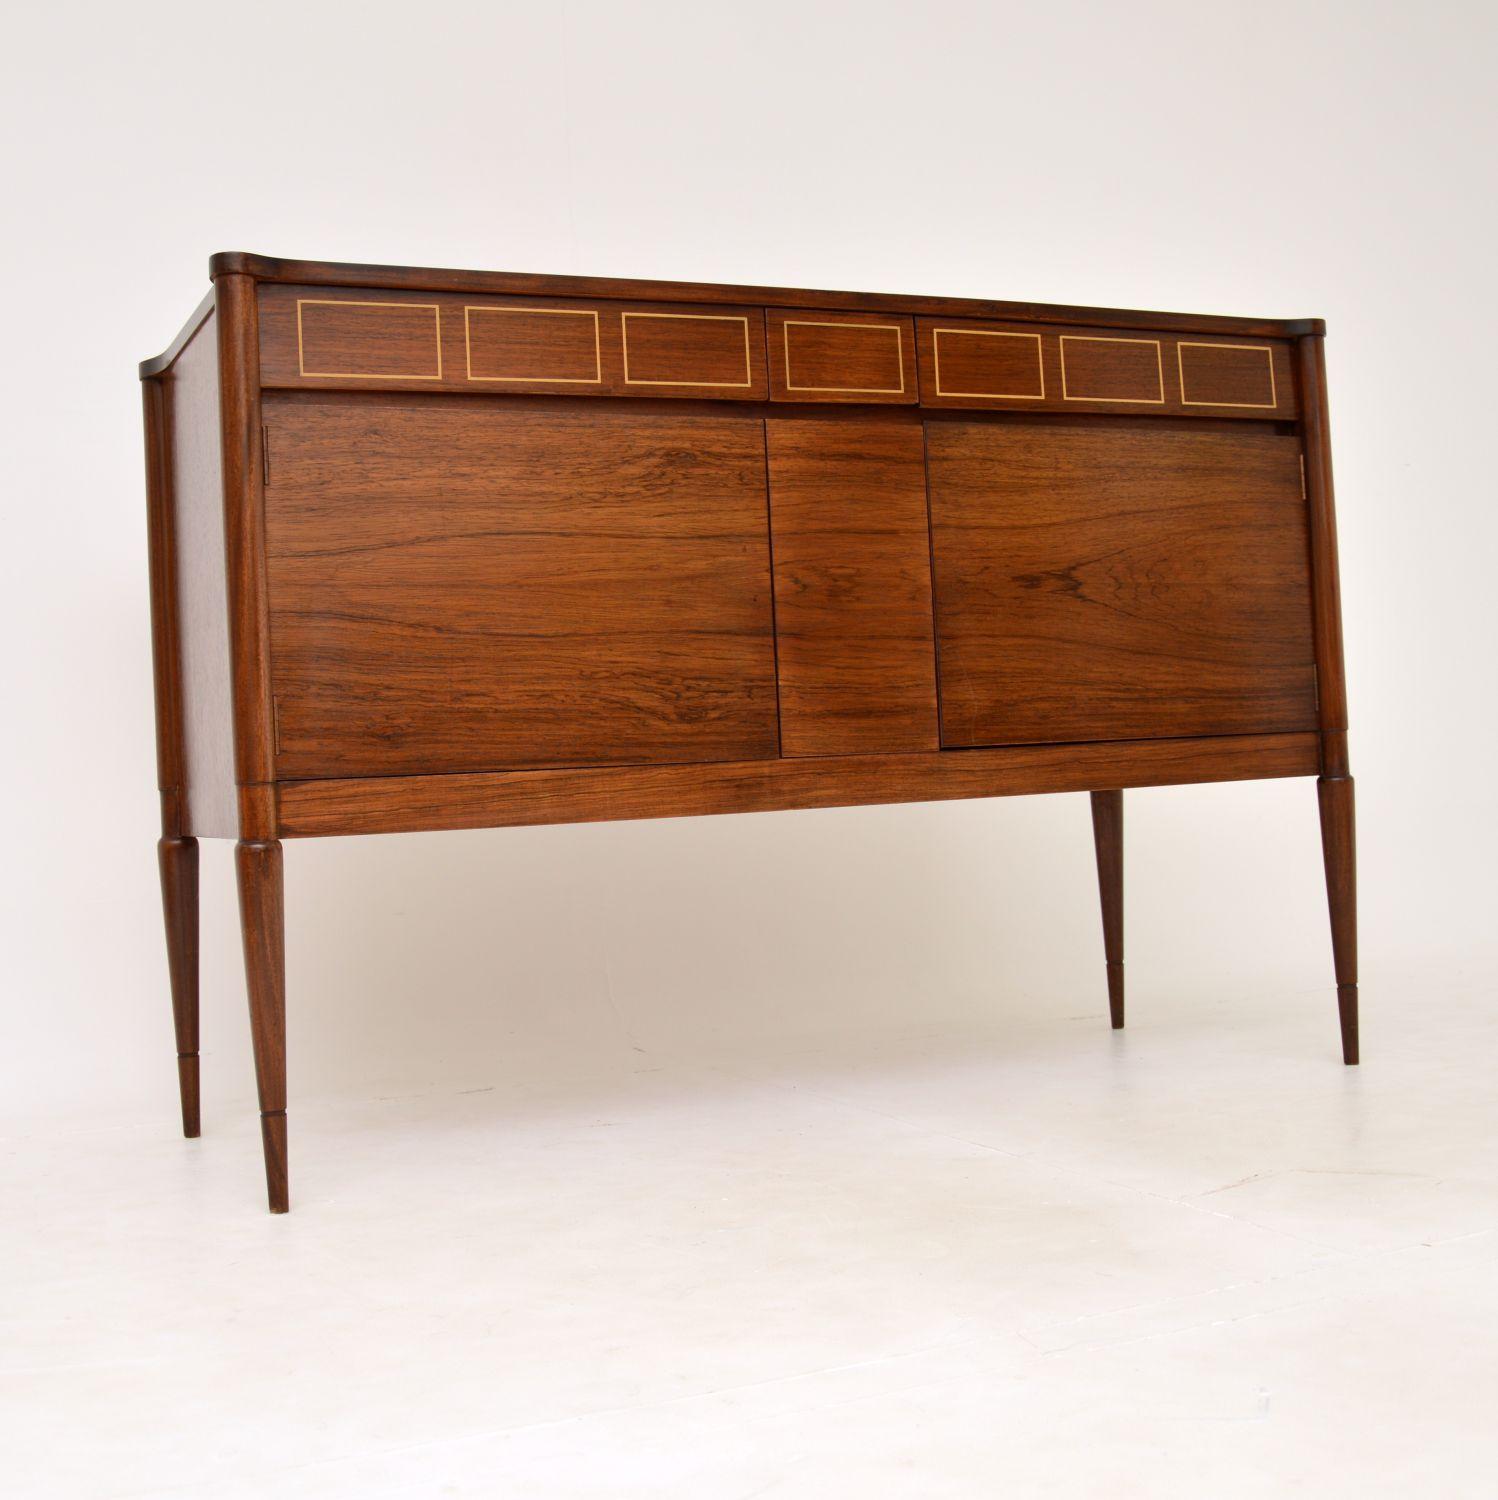 A beautiful and unique vintage sideboard. This was made in England in the 1960’s, the previous owner actually had it bespoke made especially for him.

It is of superb quality and is beautifully designed. It sits on lovely tapered legs and has an